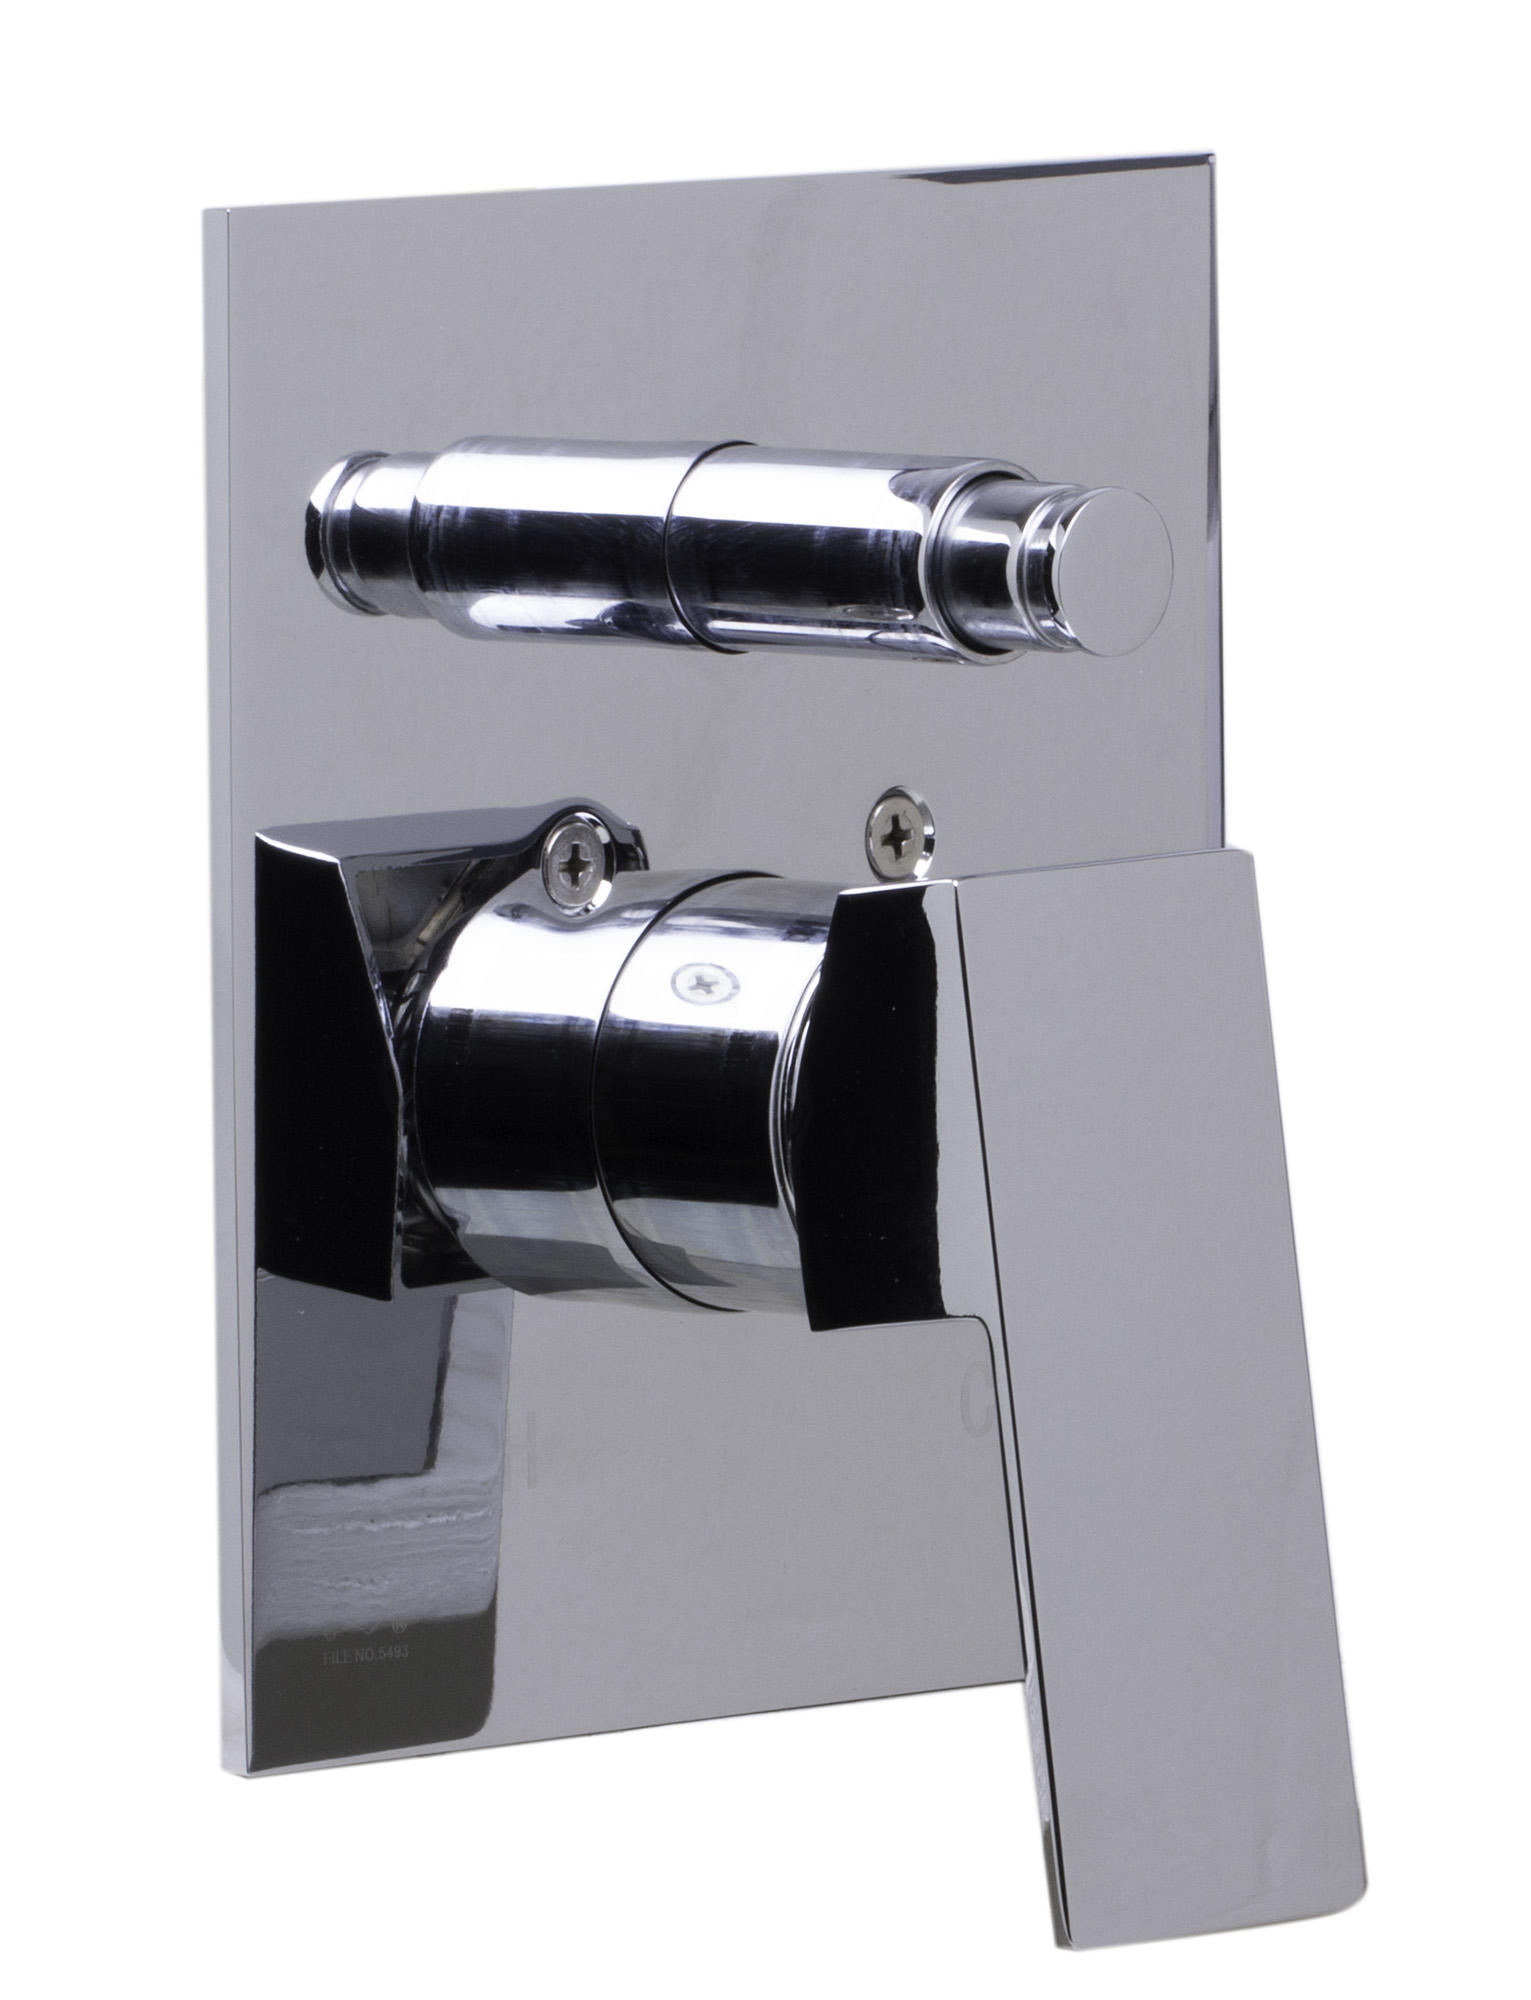 ALFI brand AB5601-PC Polished Chrome Shower Valve Mixer with Square Lever Handle and Diverter